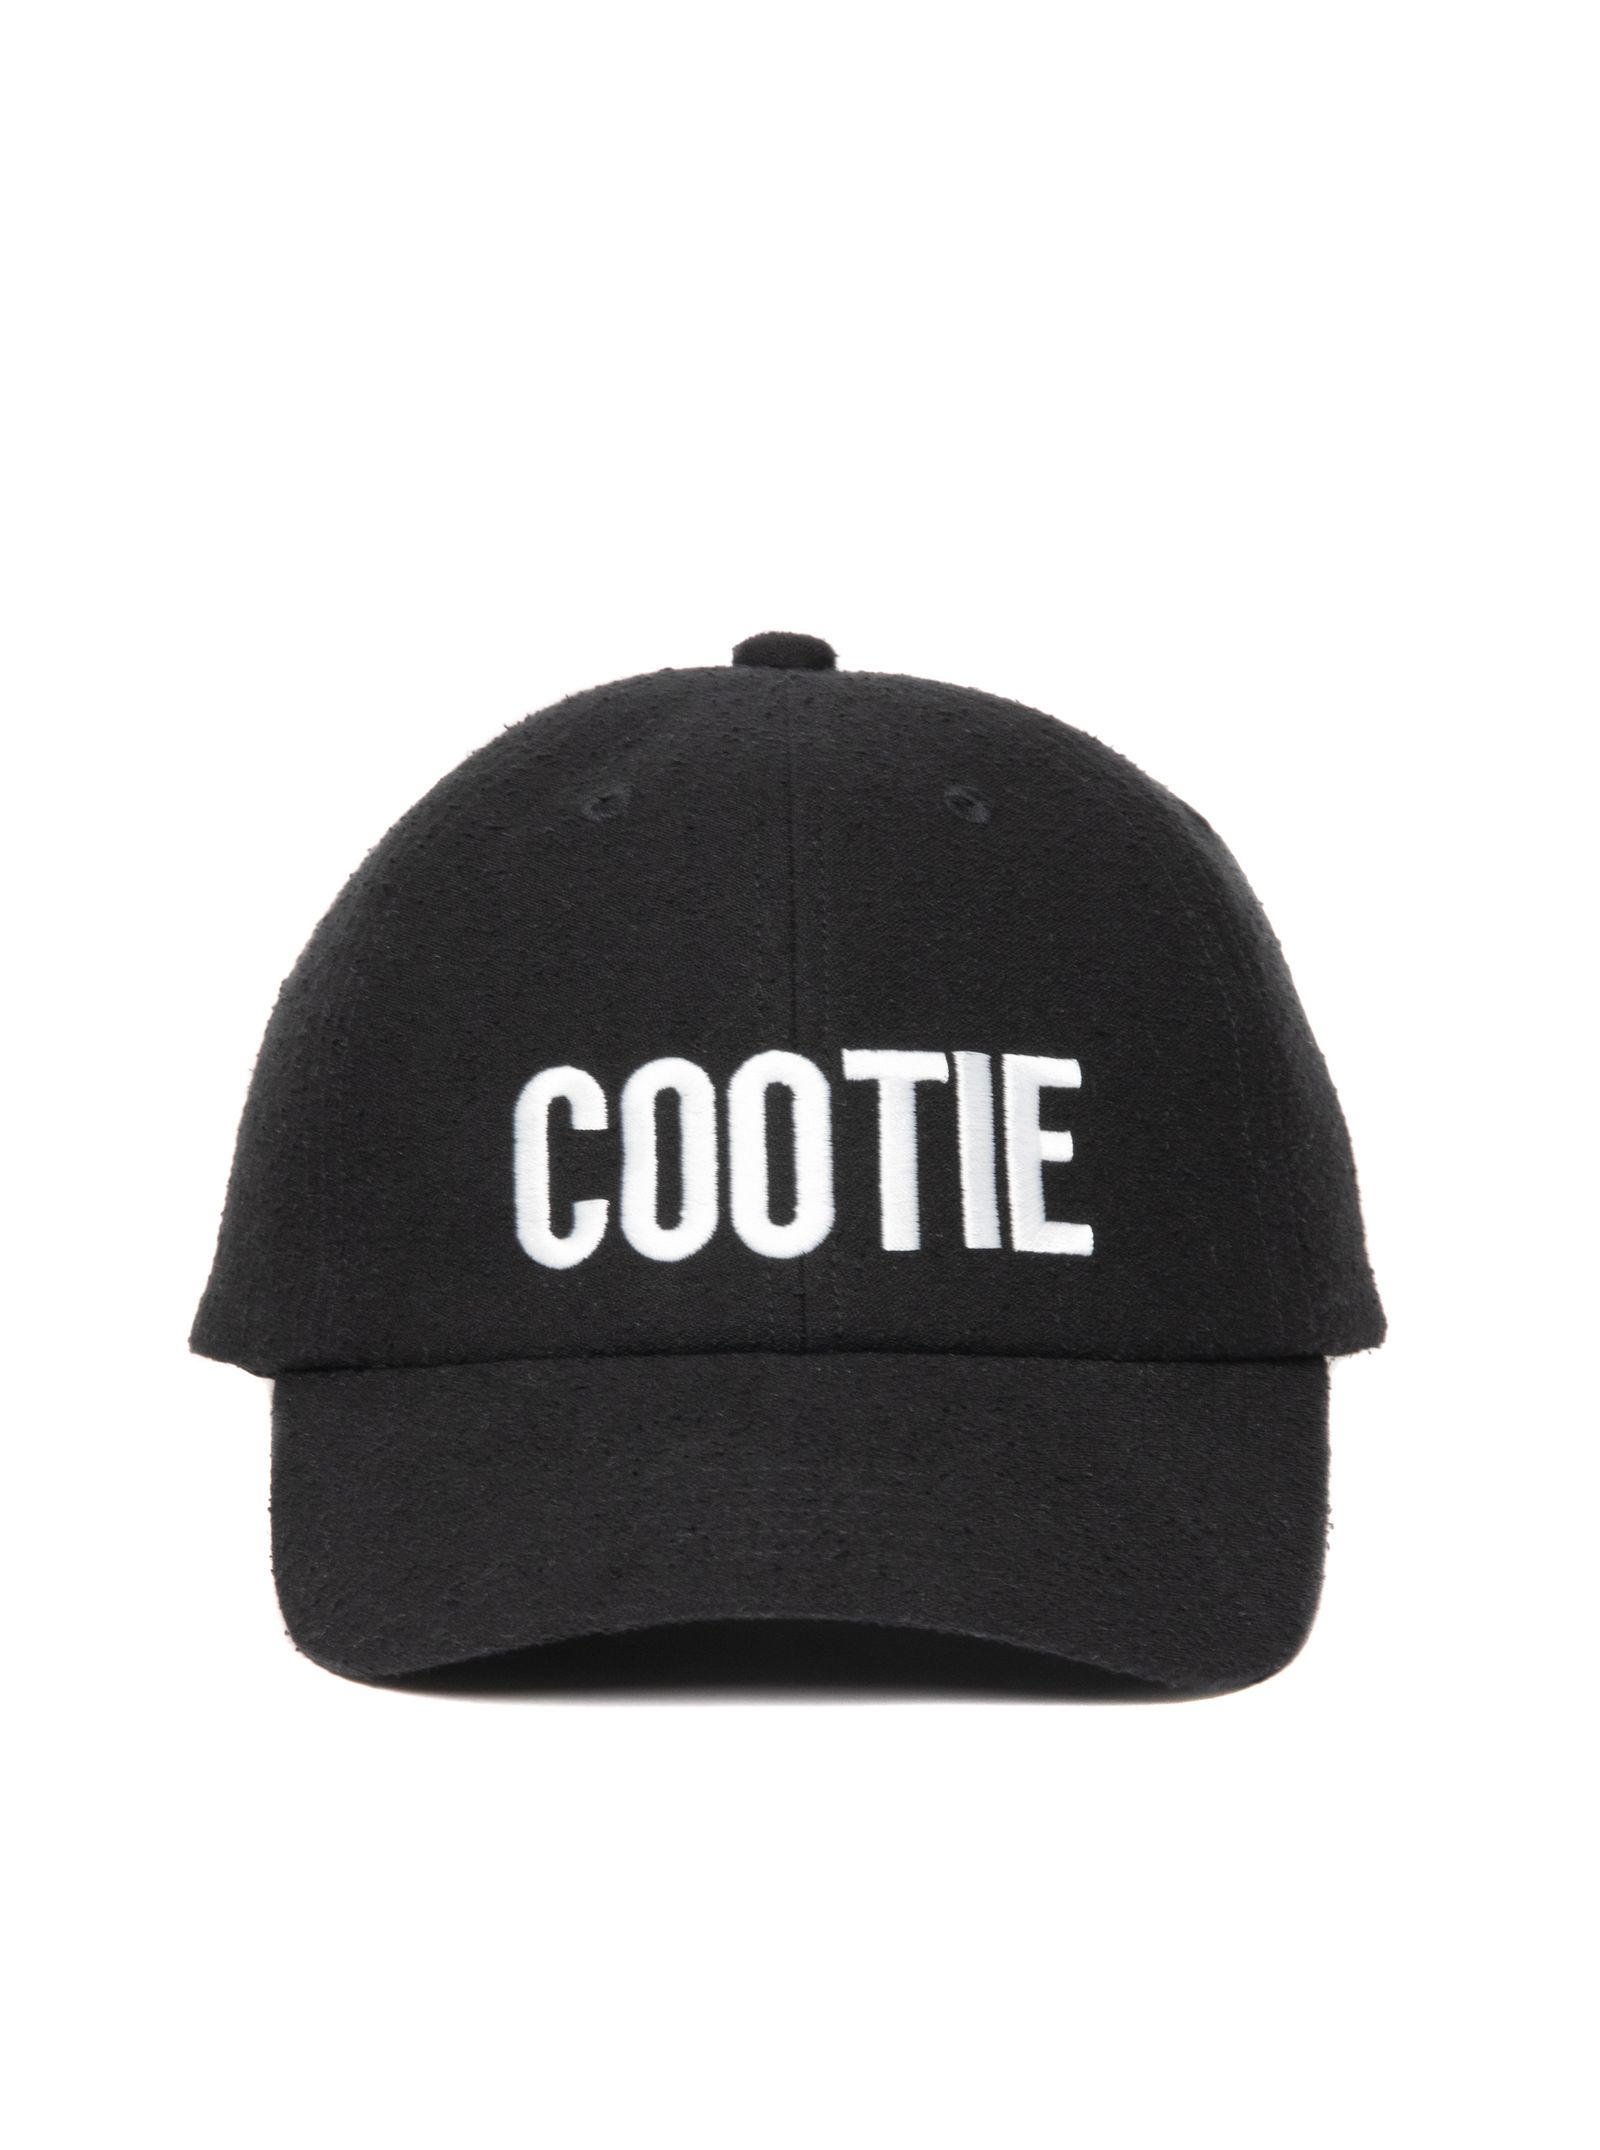 cootie productions キャップ - 帽子